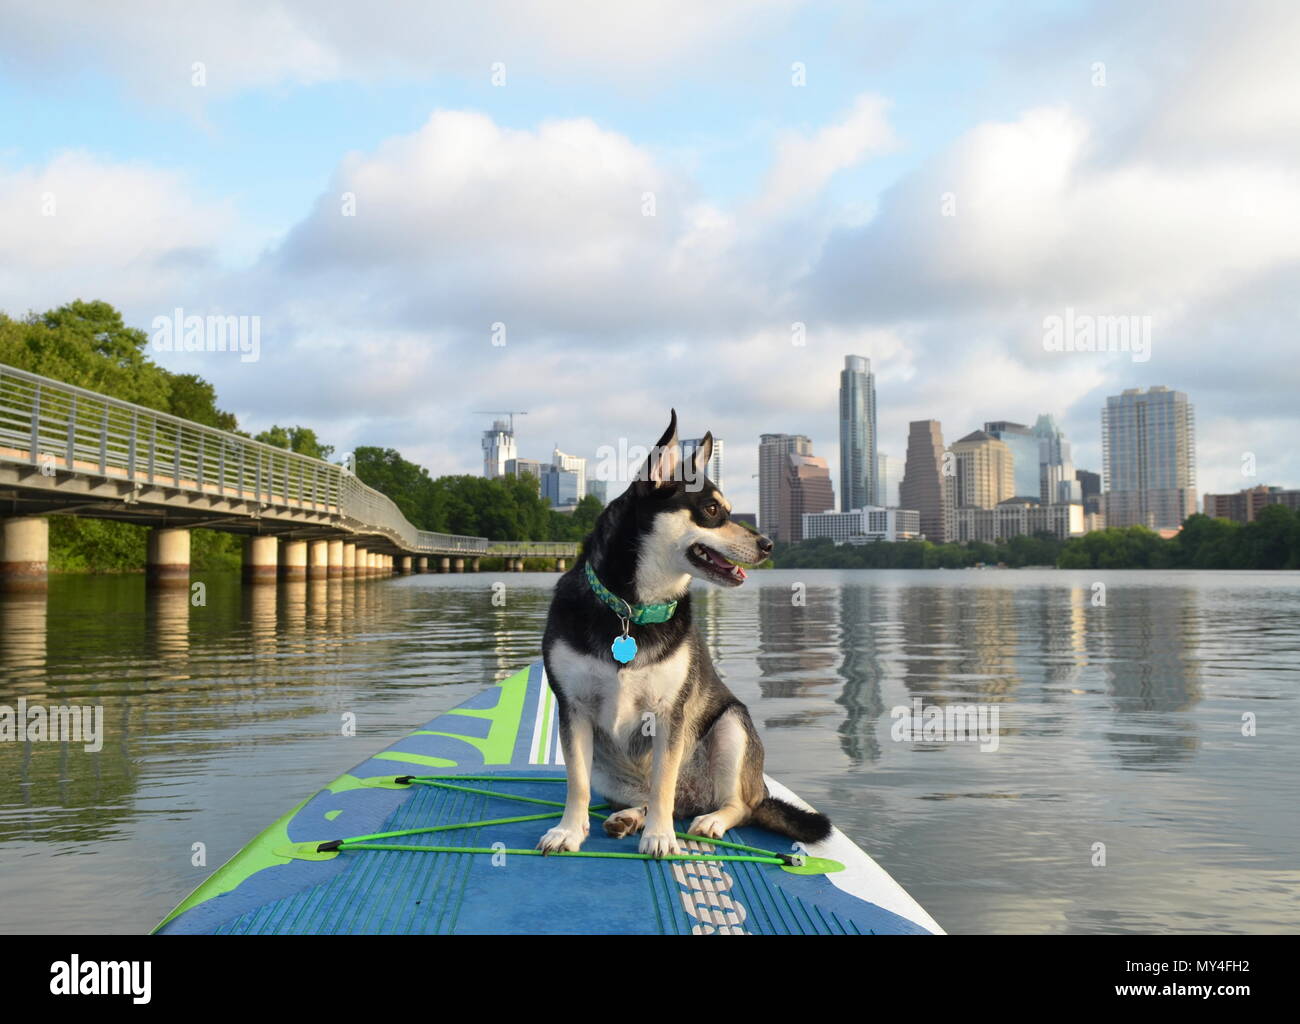 Paddle boarding in the morning with a dog next to the Austin boardwalk on Lady Bird Lake, Austin, TX. Stock Photo